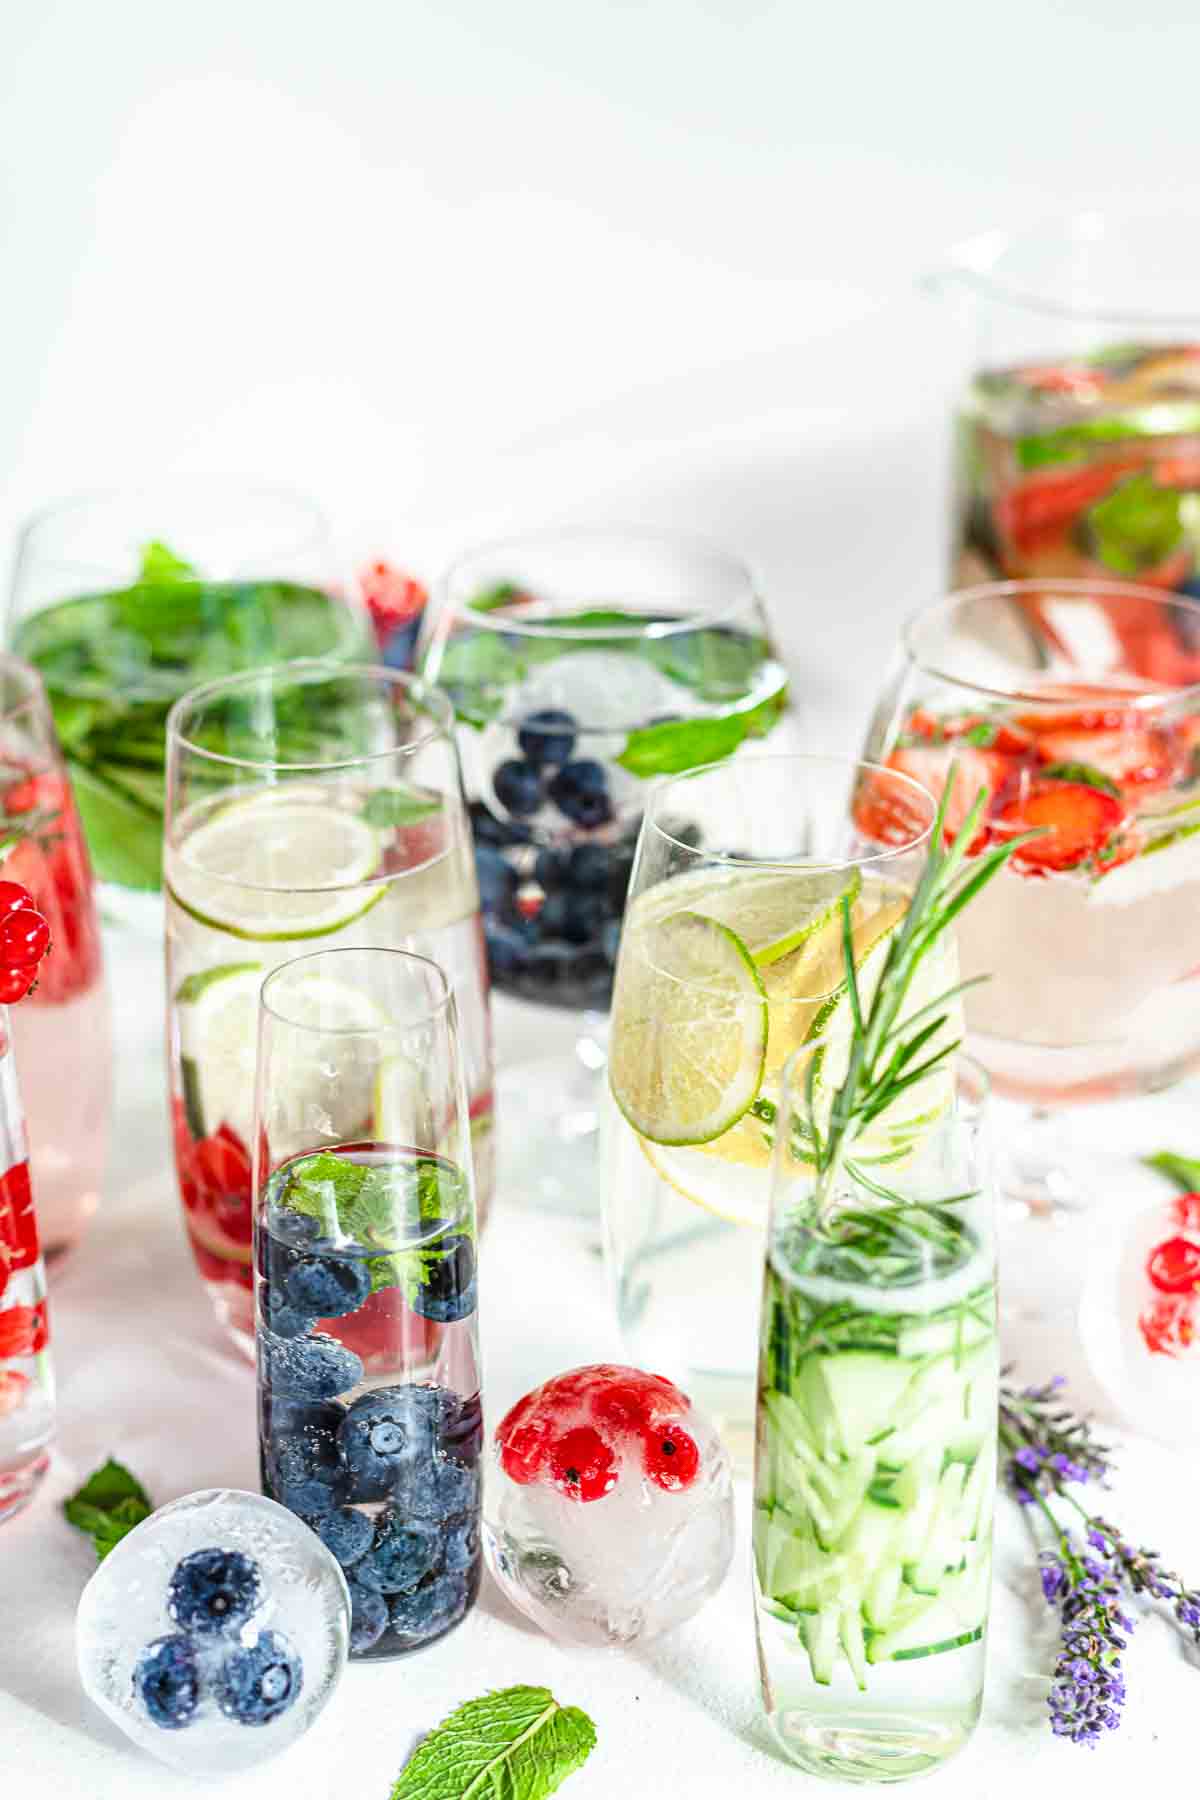 A group of glasses filled with fruit and ice.